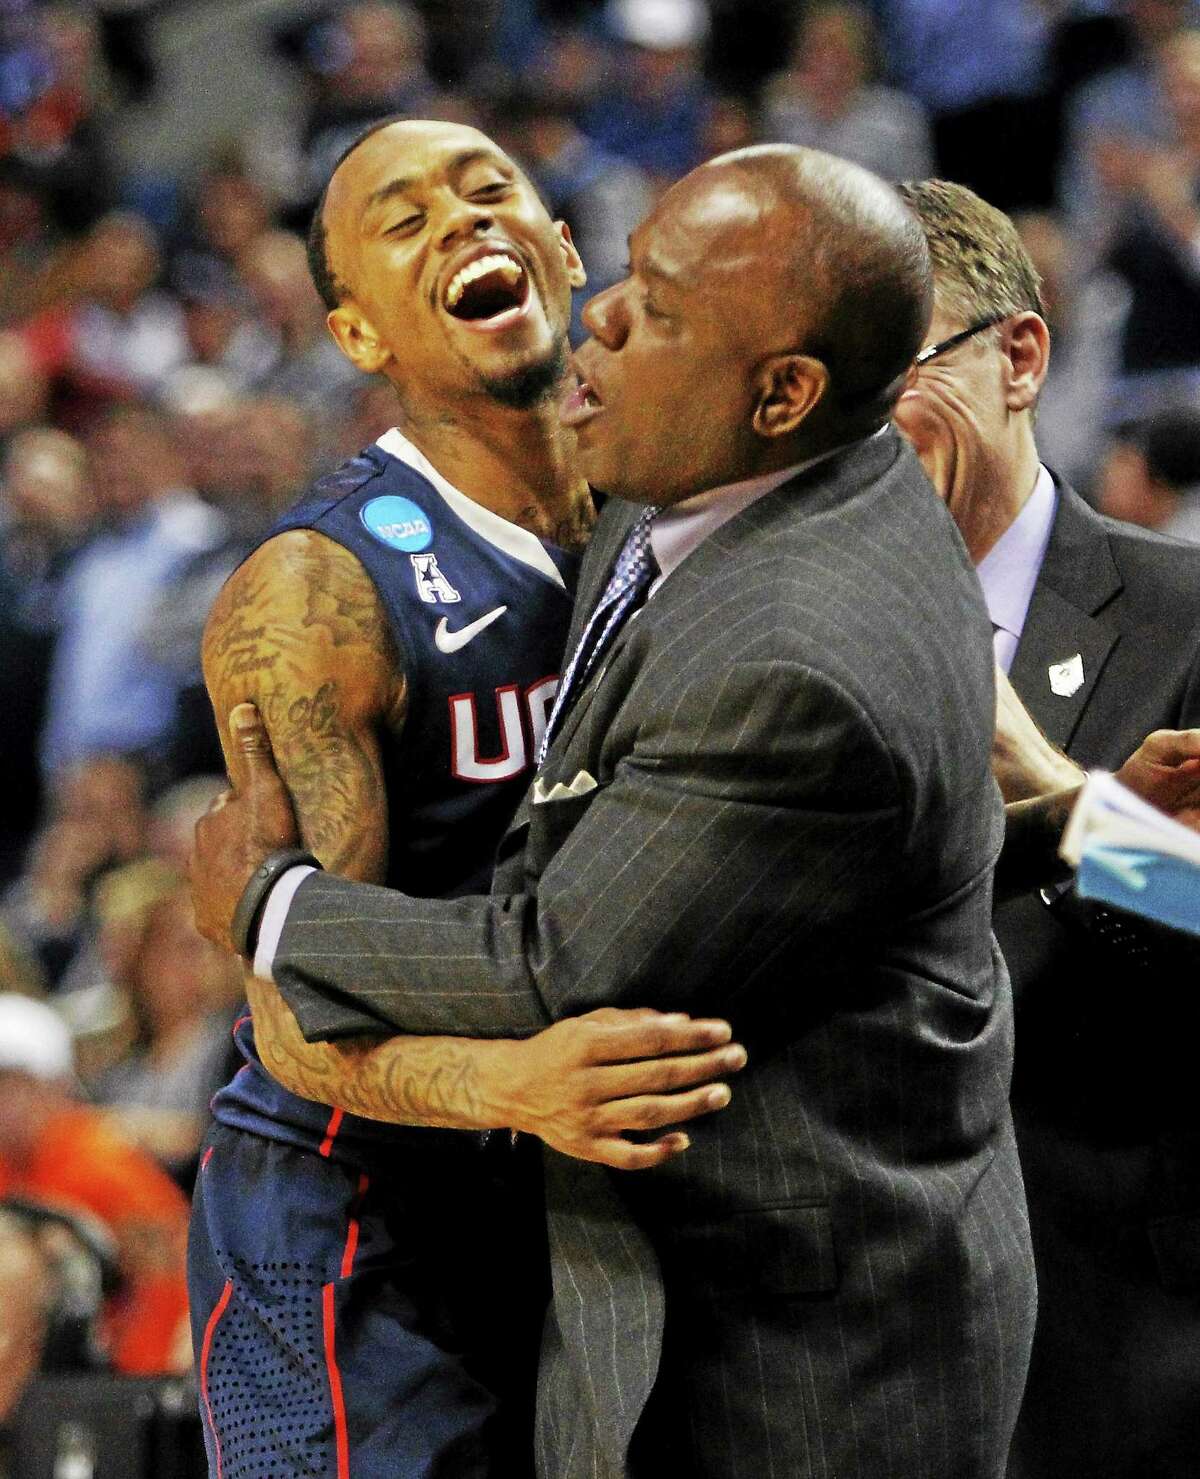 UConn guard Ryan Boatright celebrates with assistant coach Karl Hobbs late in the second half of the Huskies’ 77-65 win over Villanova in the third round of the NCAA tournament on March 22 in Buffalo, N.Y.